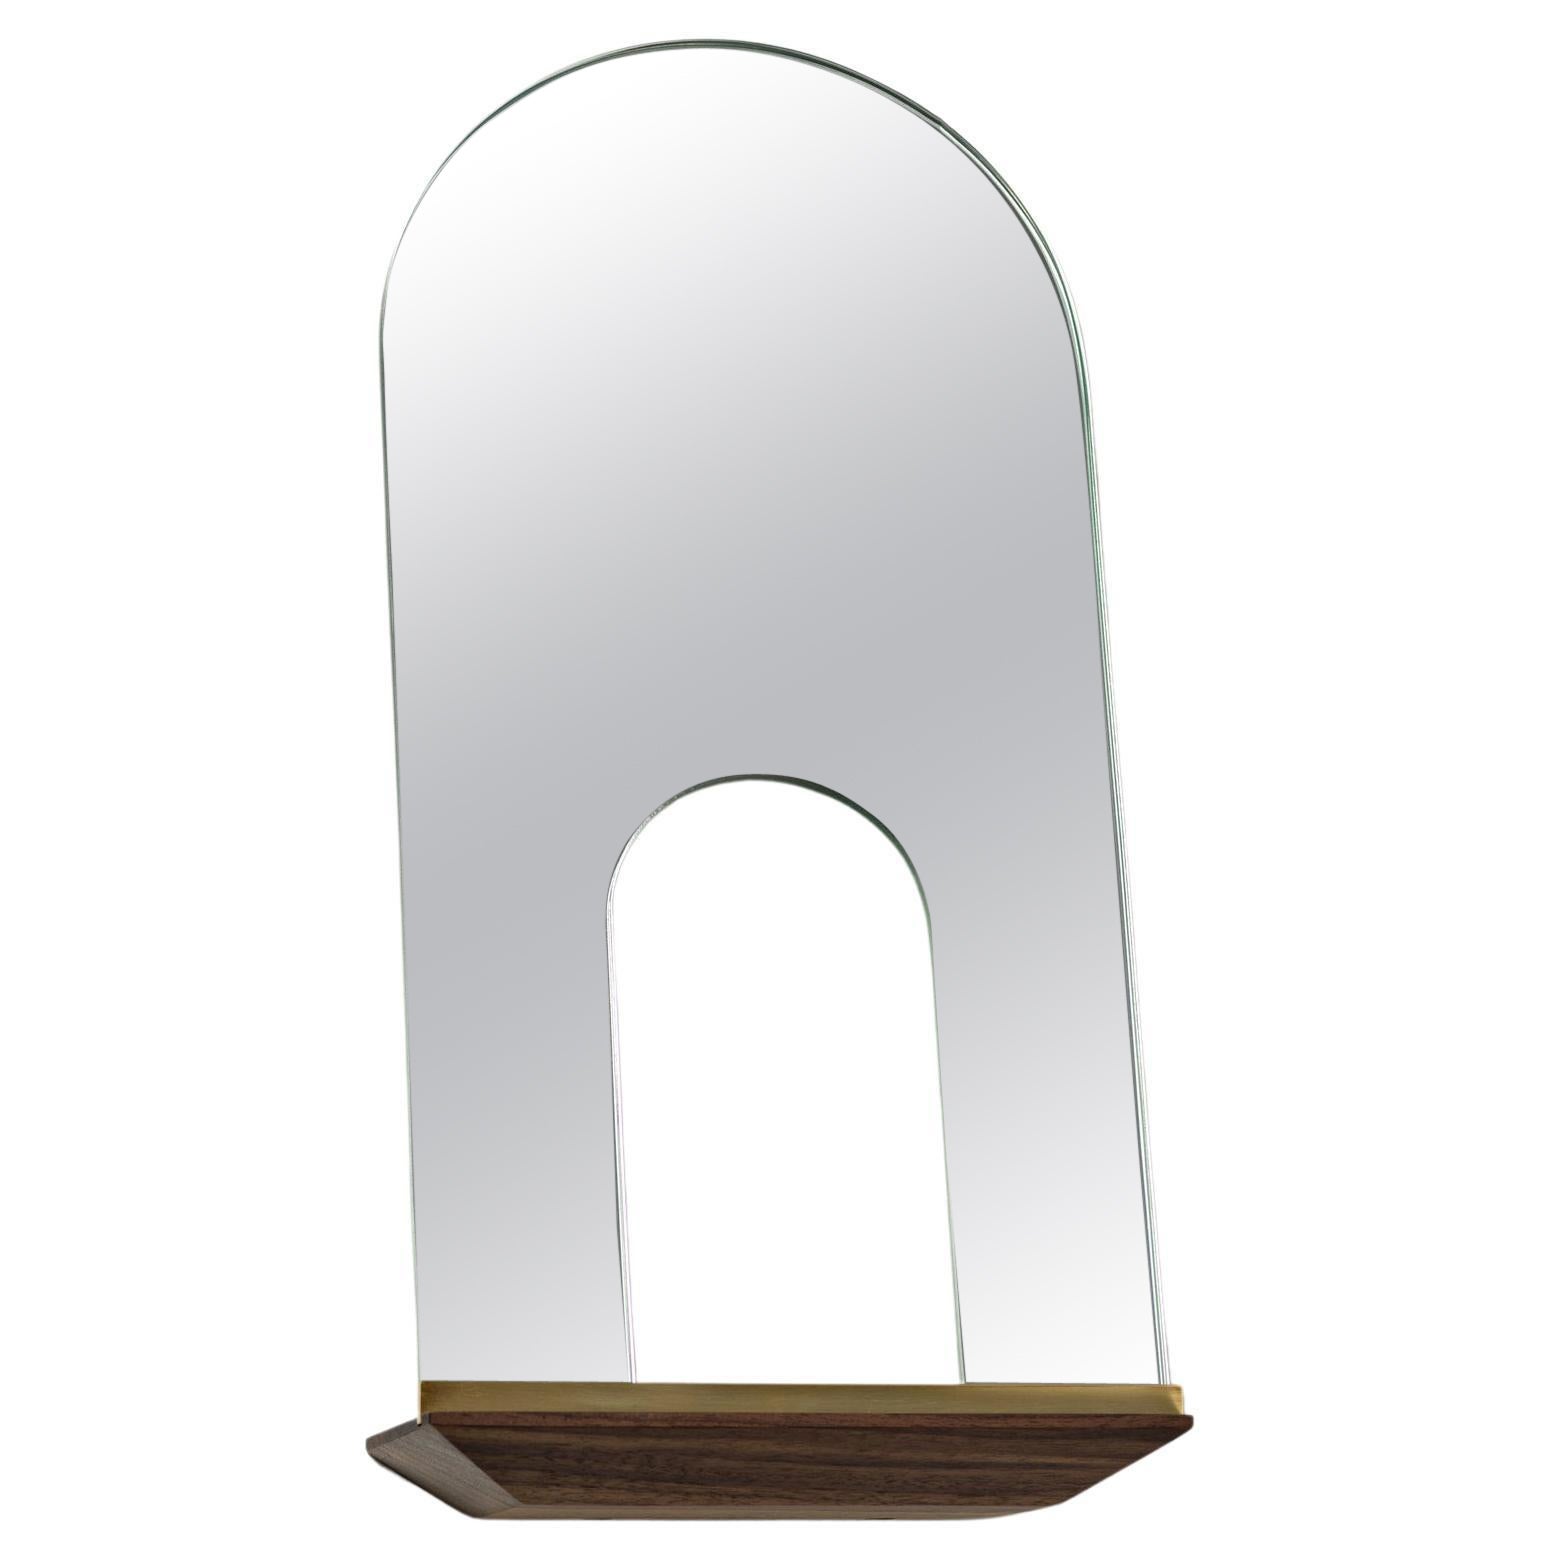 Daily-Use Mirror #4 by Phaedo For Sale